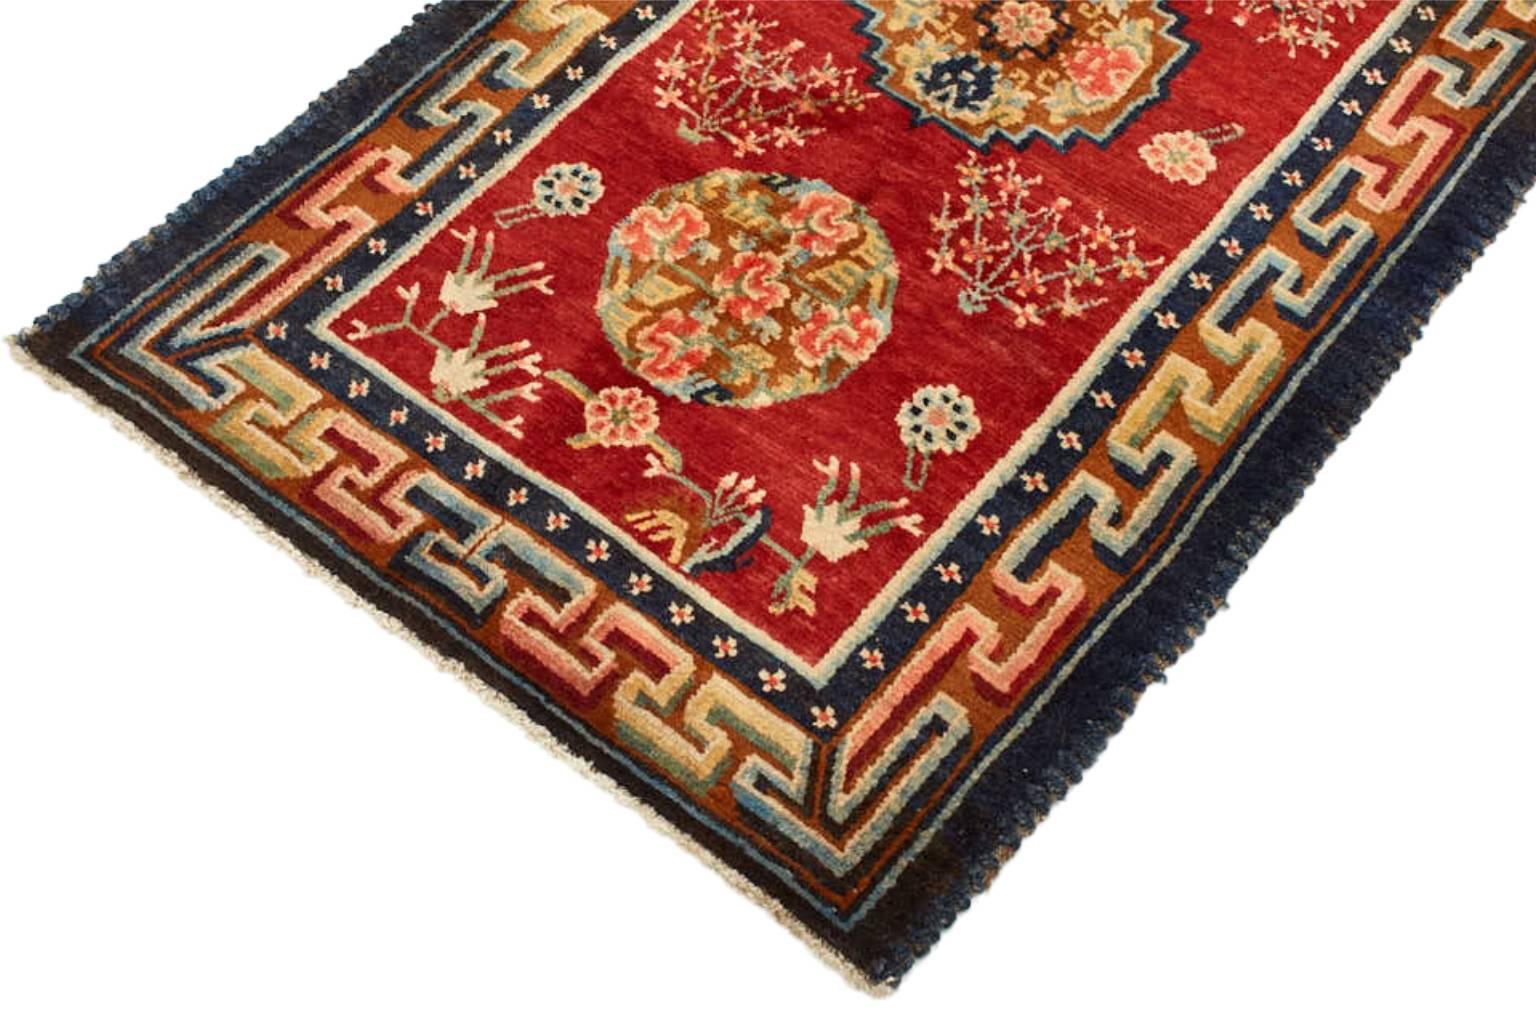 Handwoven from wool in Nepal, this vintage rug features a trio of mandalas set within a deep crimson field and accented by stylized floral motifs. A border of 'endless knots', symbols thought to have powers that bring happiness, long life, love, and